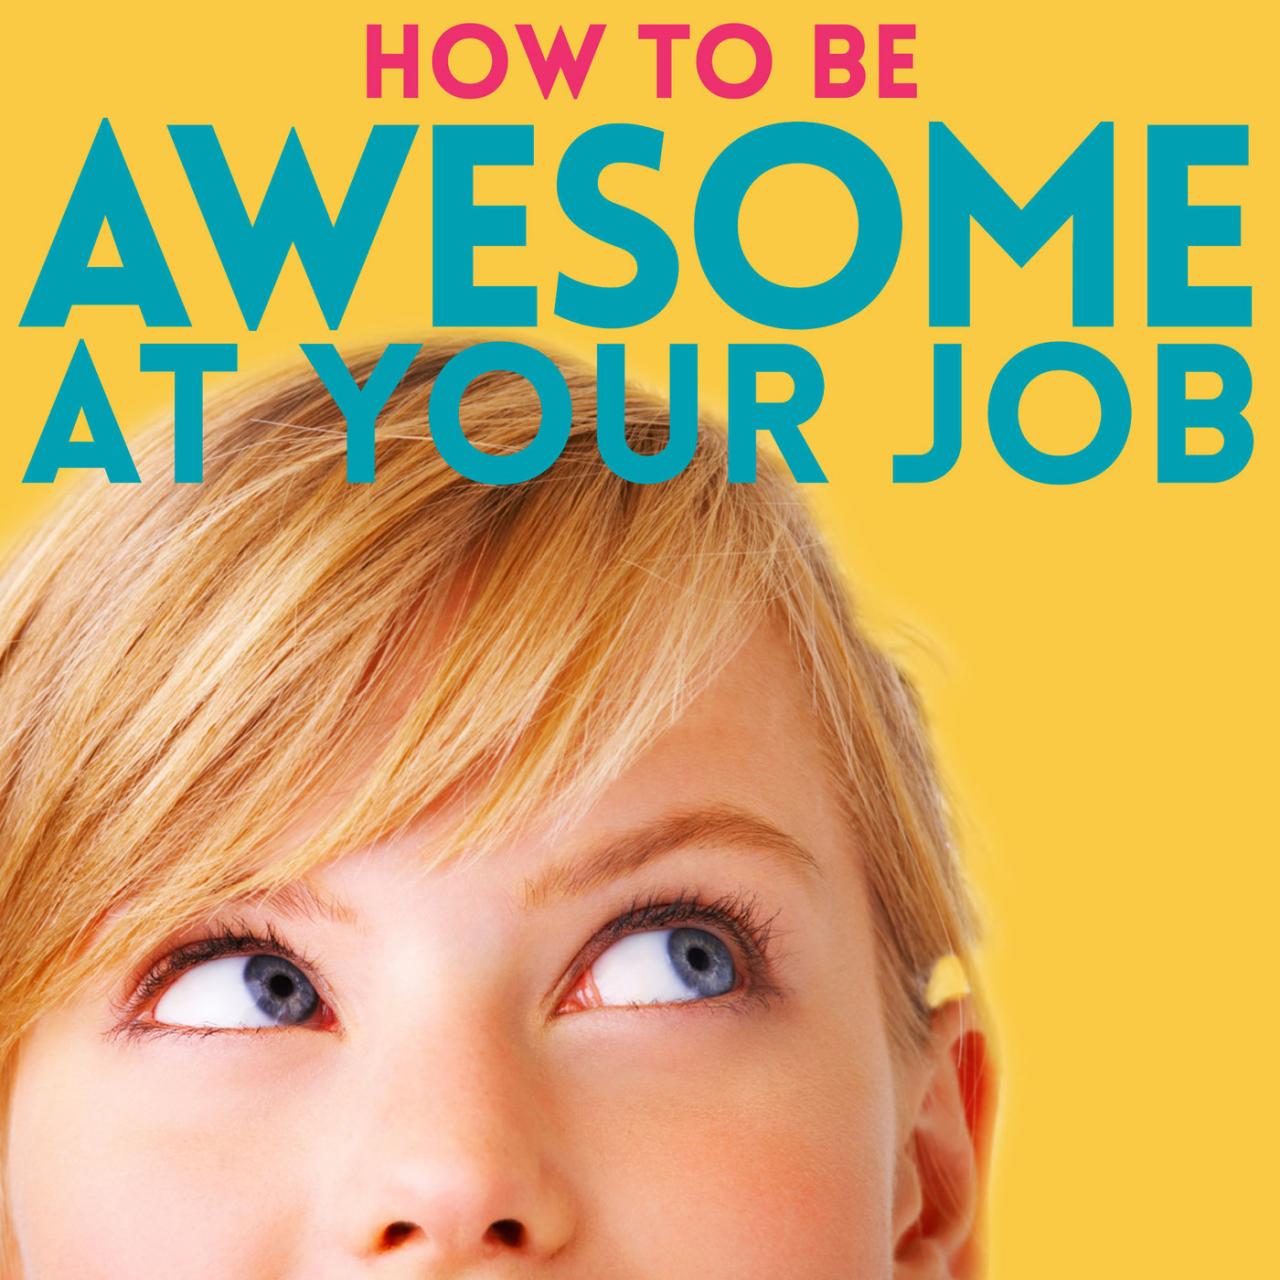 How to get an awesome job